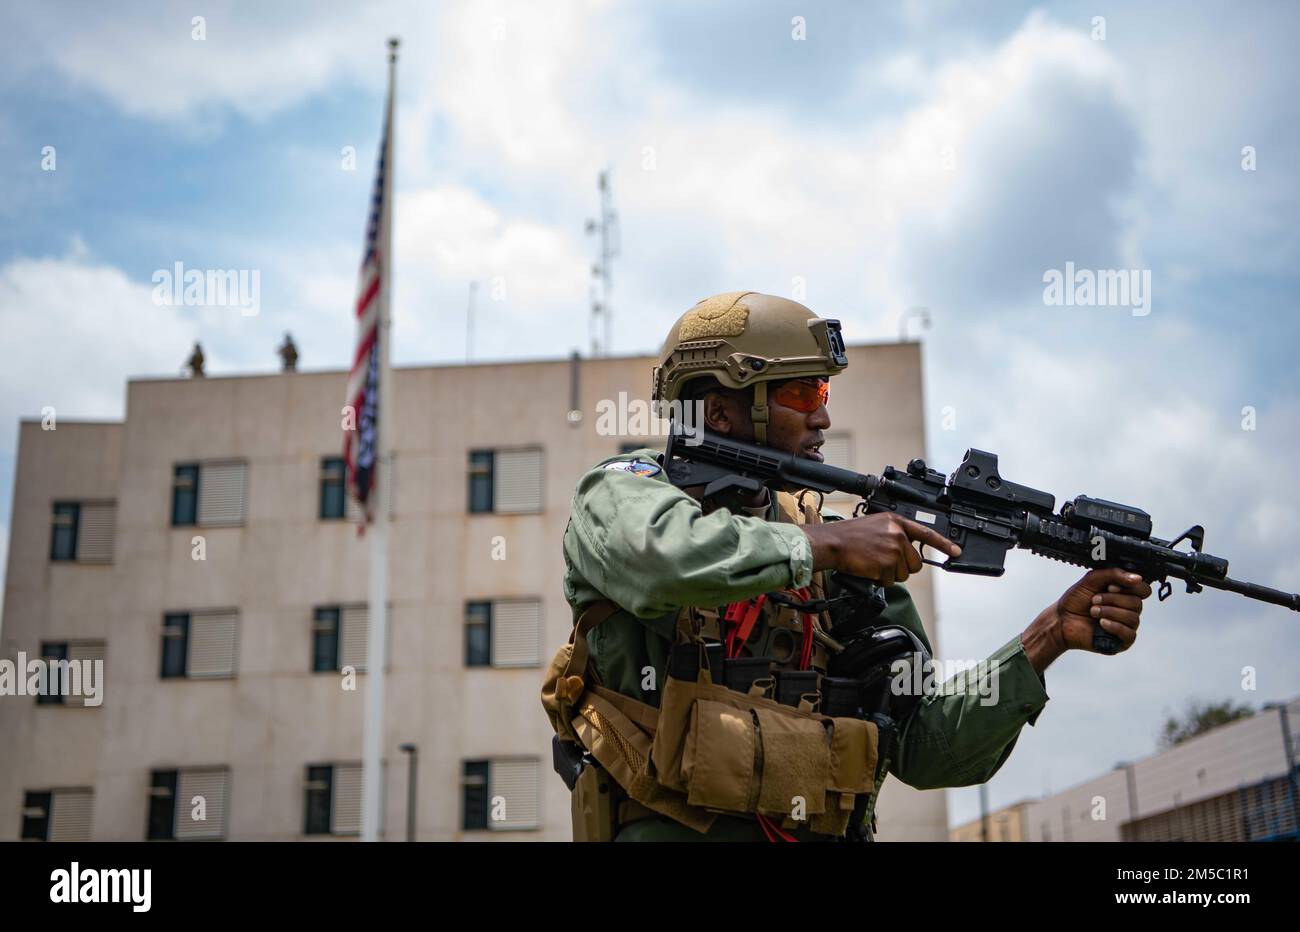 A Kenyan Defense Force member with the Special Program for Embassy Augmentation and Response (SPEAR) pulls security during an Emergency Deployment Readiness Exercise (EDRE) in Nairobi, Kenya, February 25, 2022. SPEAR enhances the security of U.S. diplomatic posts in high-threat, high-risk environments by training law enforcement and security personnel in host nations to better respond to emergencies at U.S. diplomatic facilities. The EDREs ensure the Combined Joint Task Force - Horn of Africa (CJTF-HOA) is prepared for any contingency, including crisis response, humanitarian assistance, non-co Stock Photo